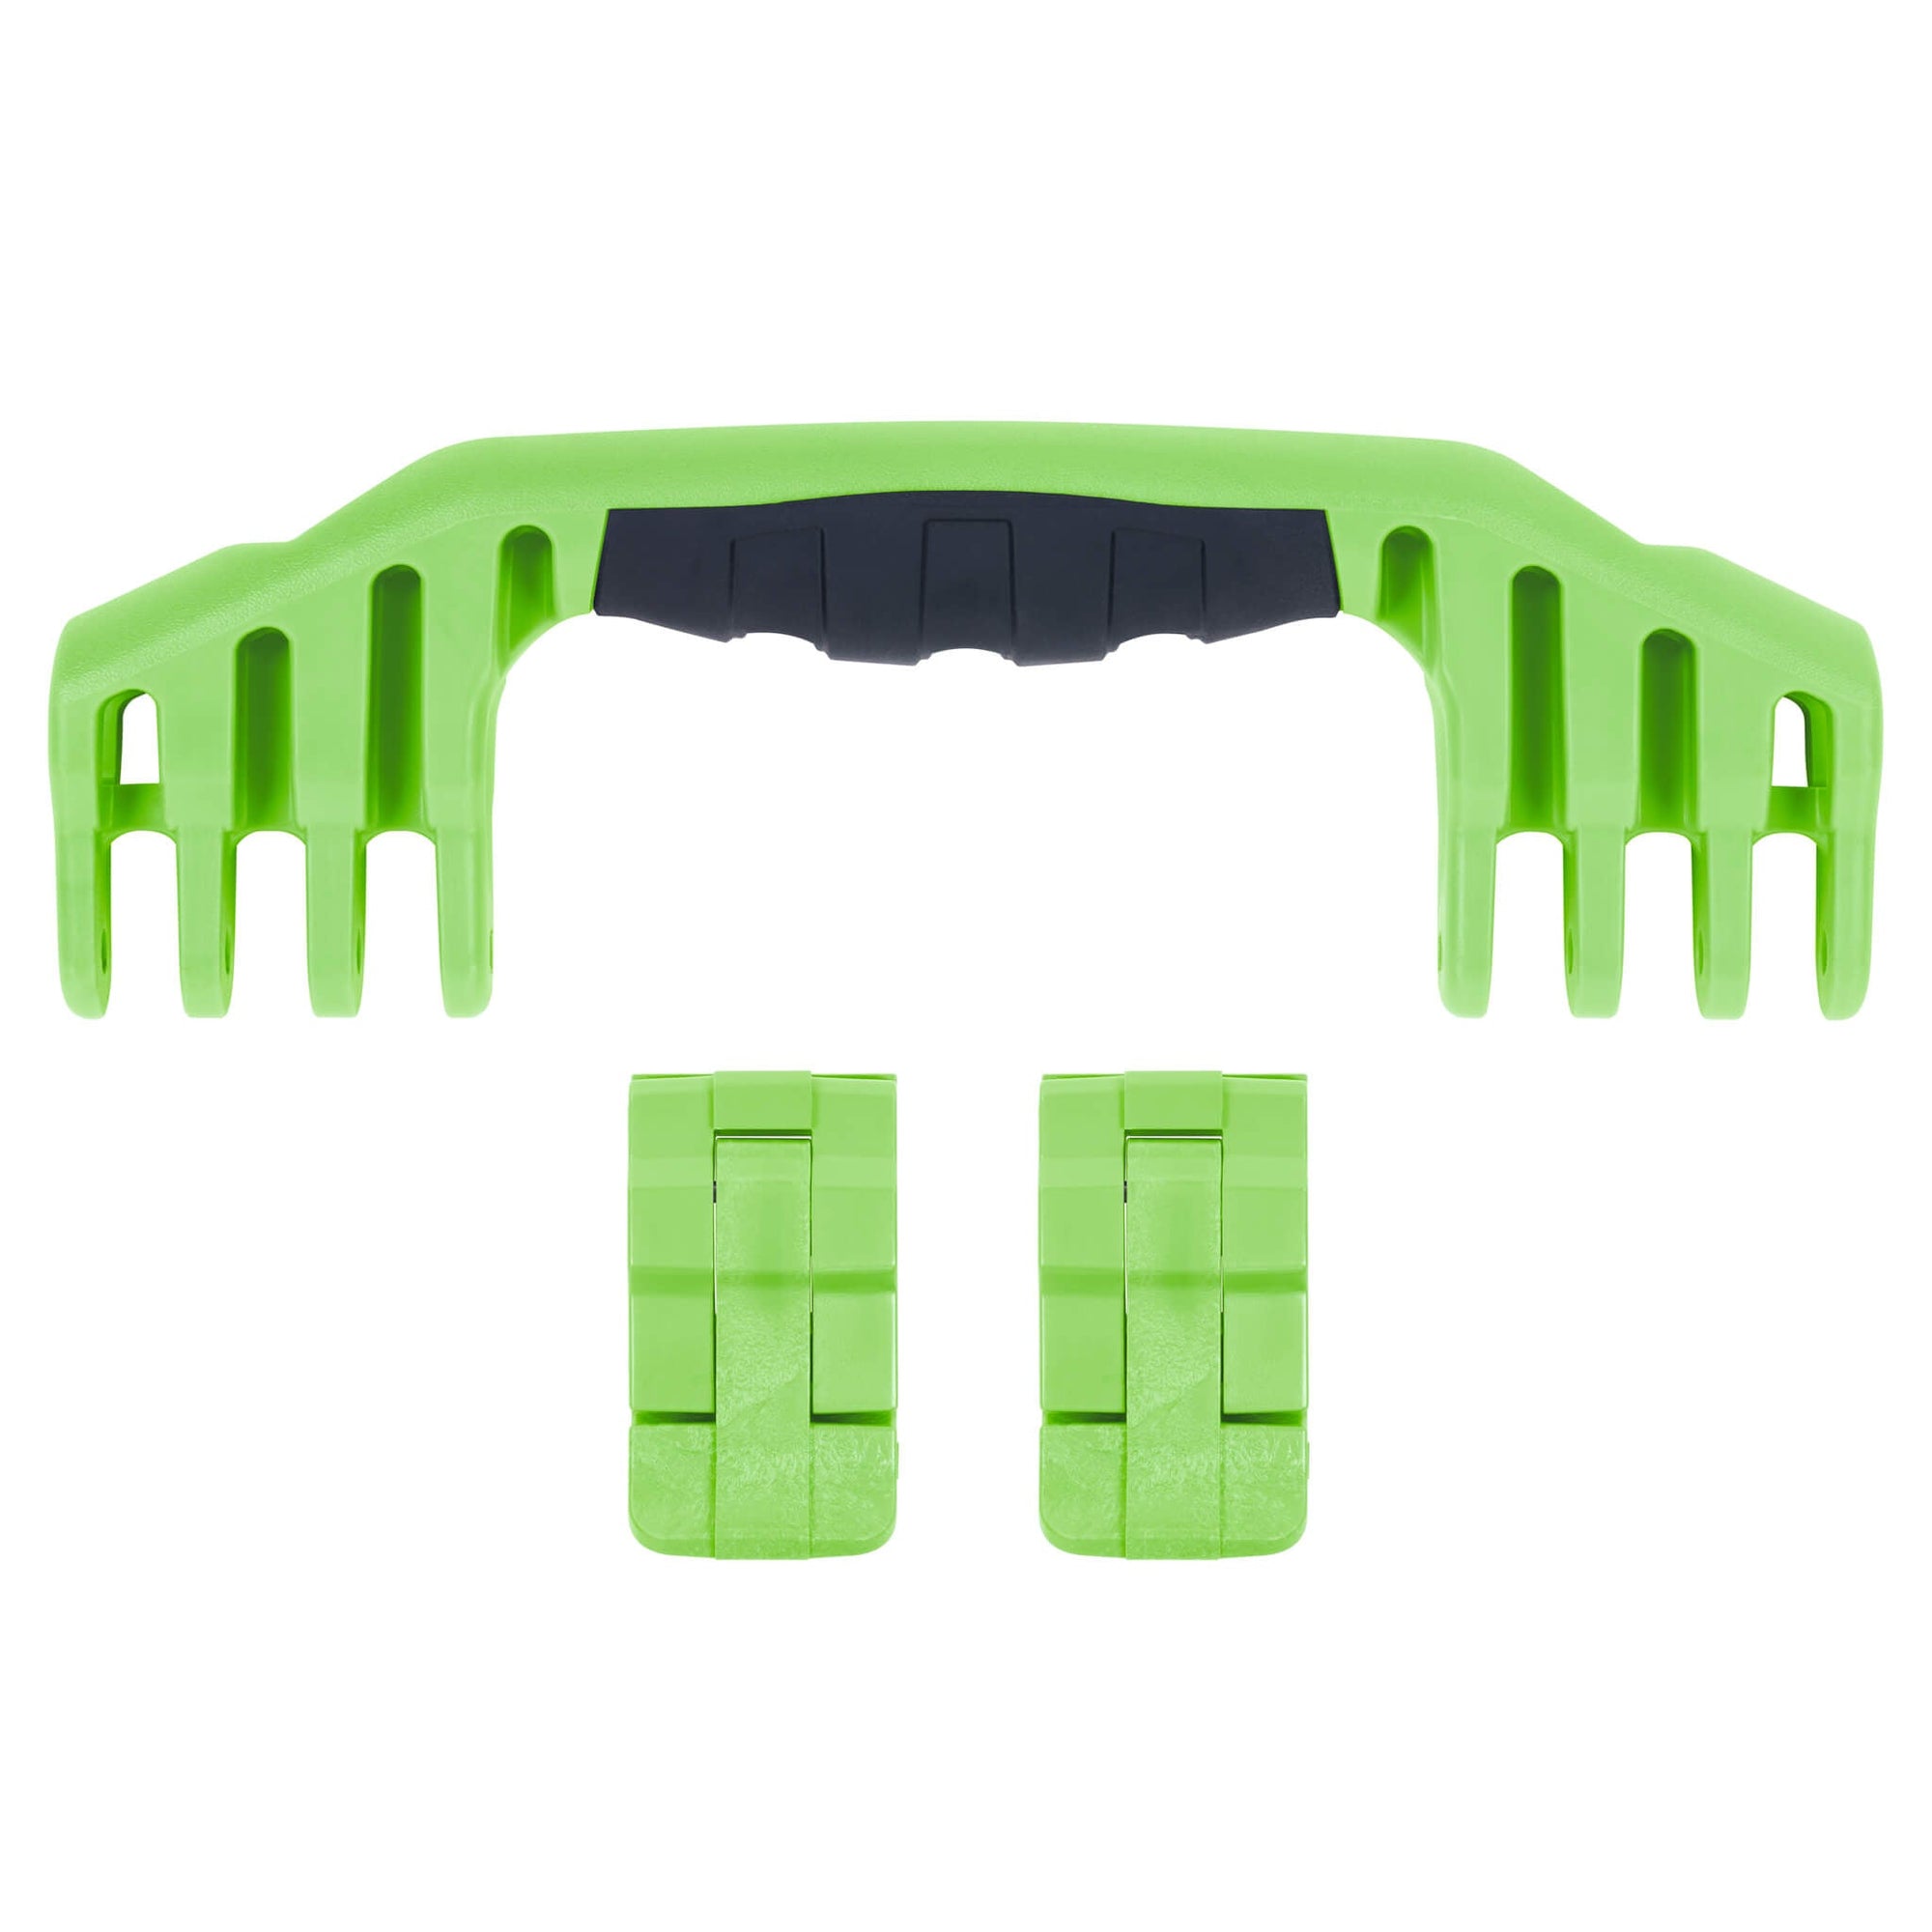 Pelican 1550 Replacement Handle & Latches, Lime Green (Set of 1 Handle, 2 Latches) ColorCase 